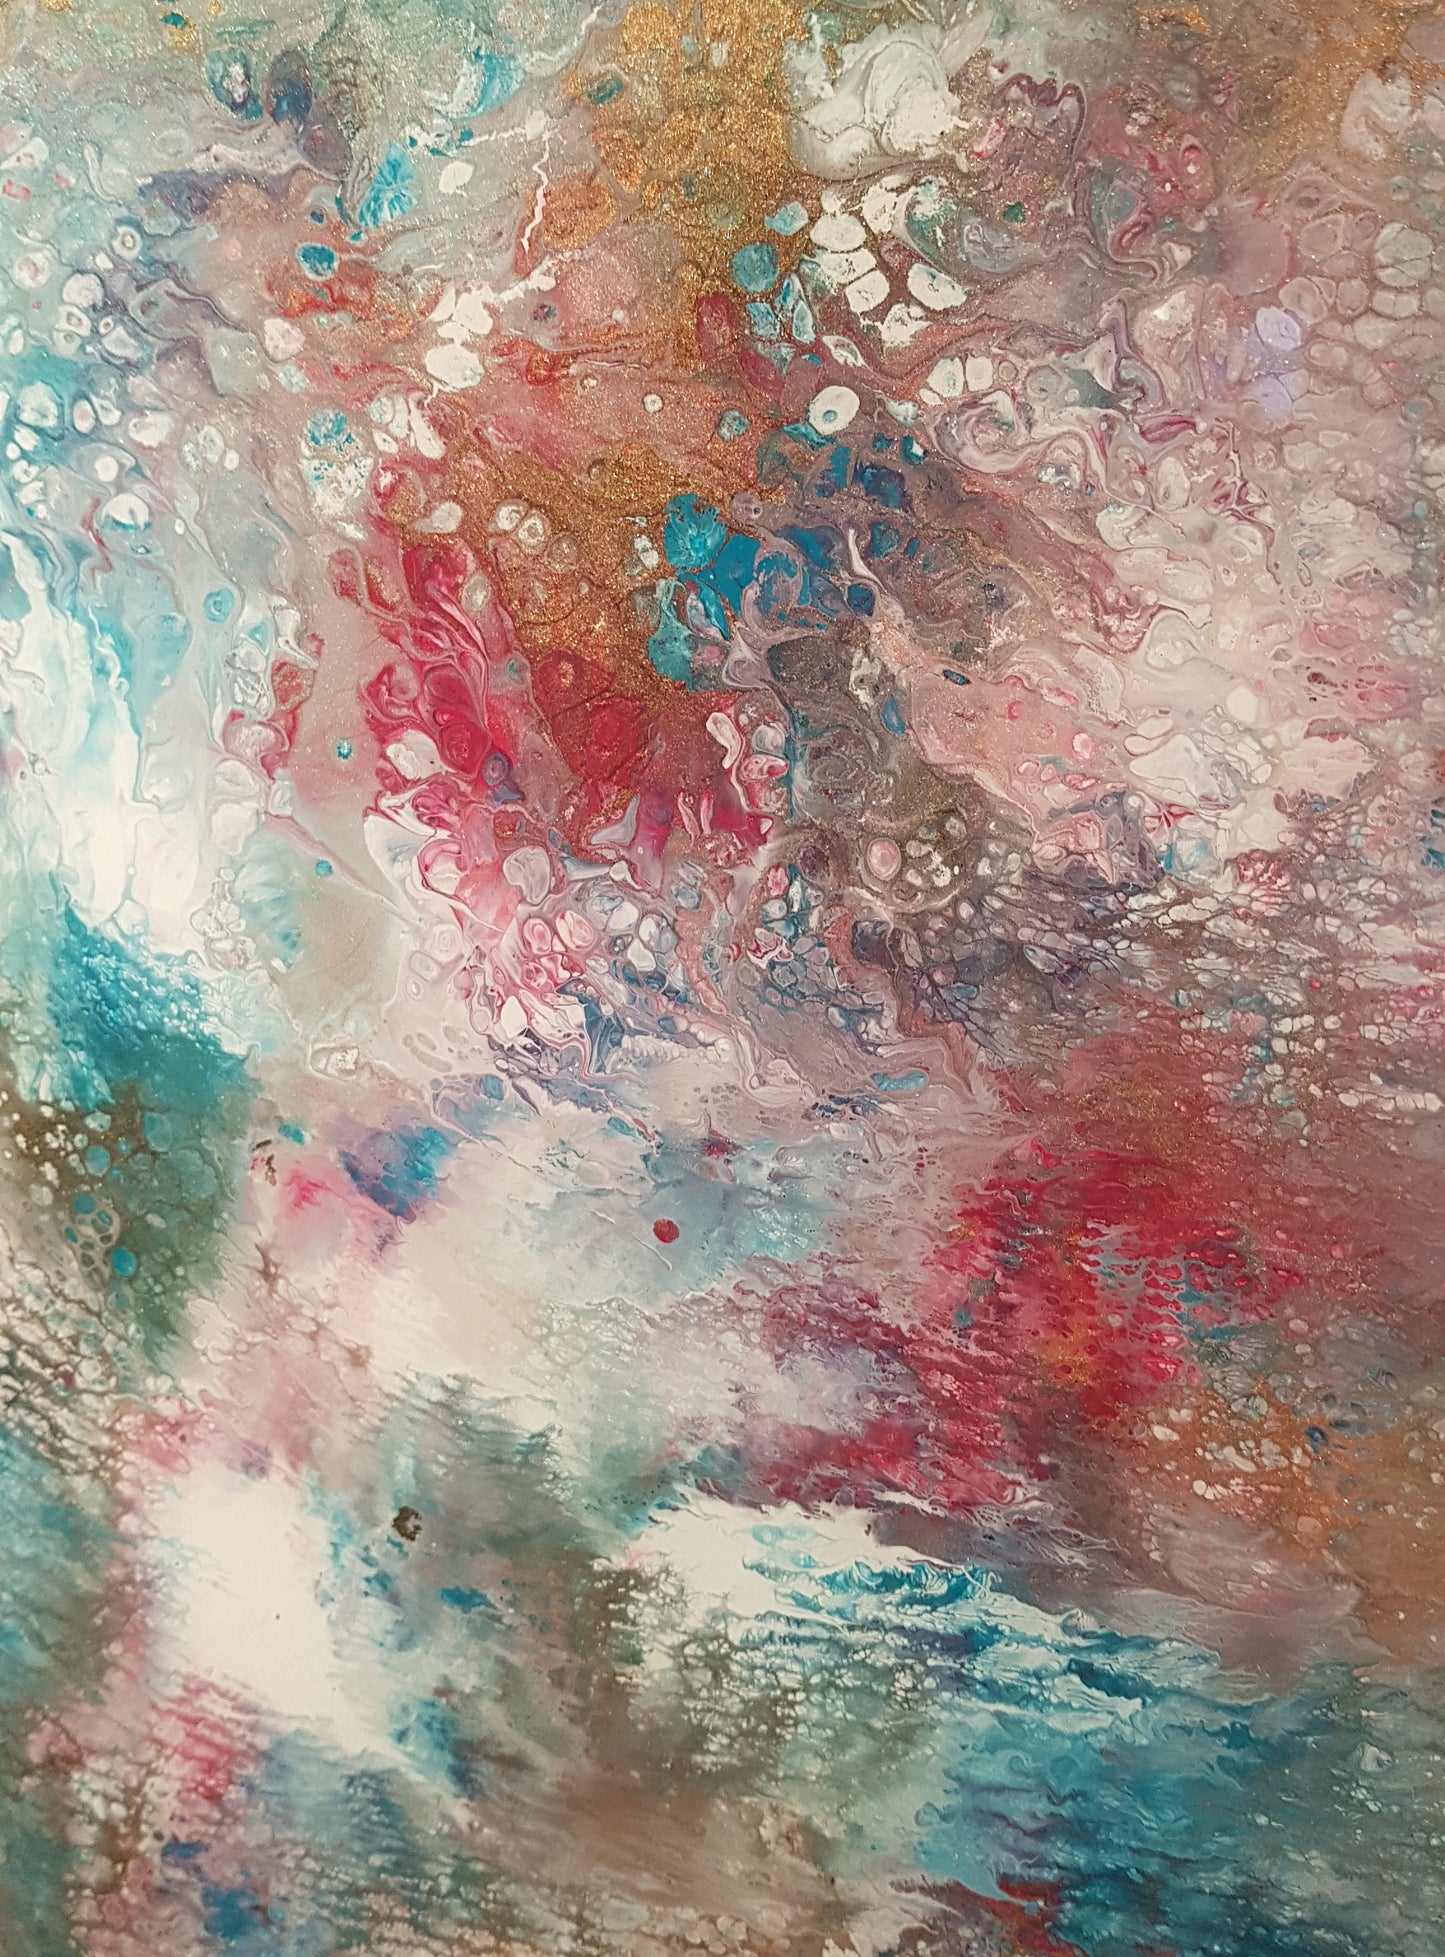 Frozen-Sky-Alexandra-Romano-Online-Art-Gallery-Buy-Unique-Abstract-Fluid-Paintings-for-Sale-Contemporary-Gold-Pink-Turquoise-Modern-Art